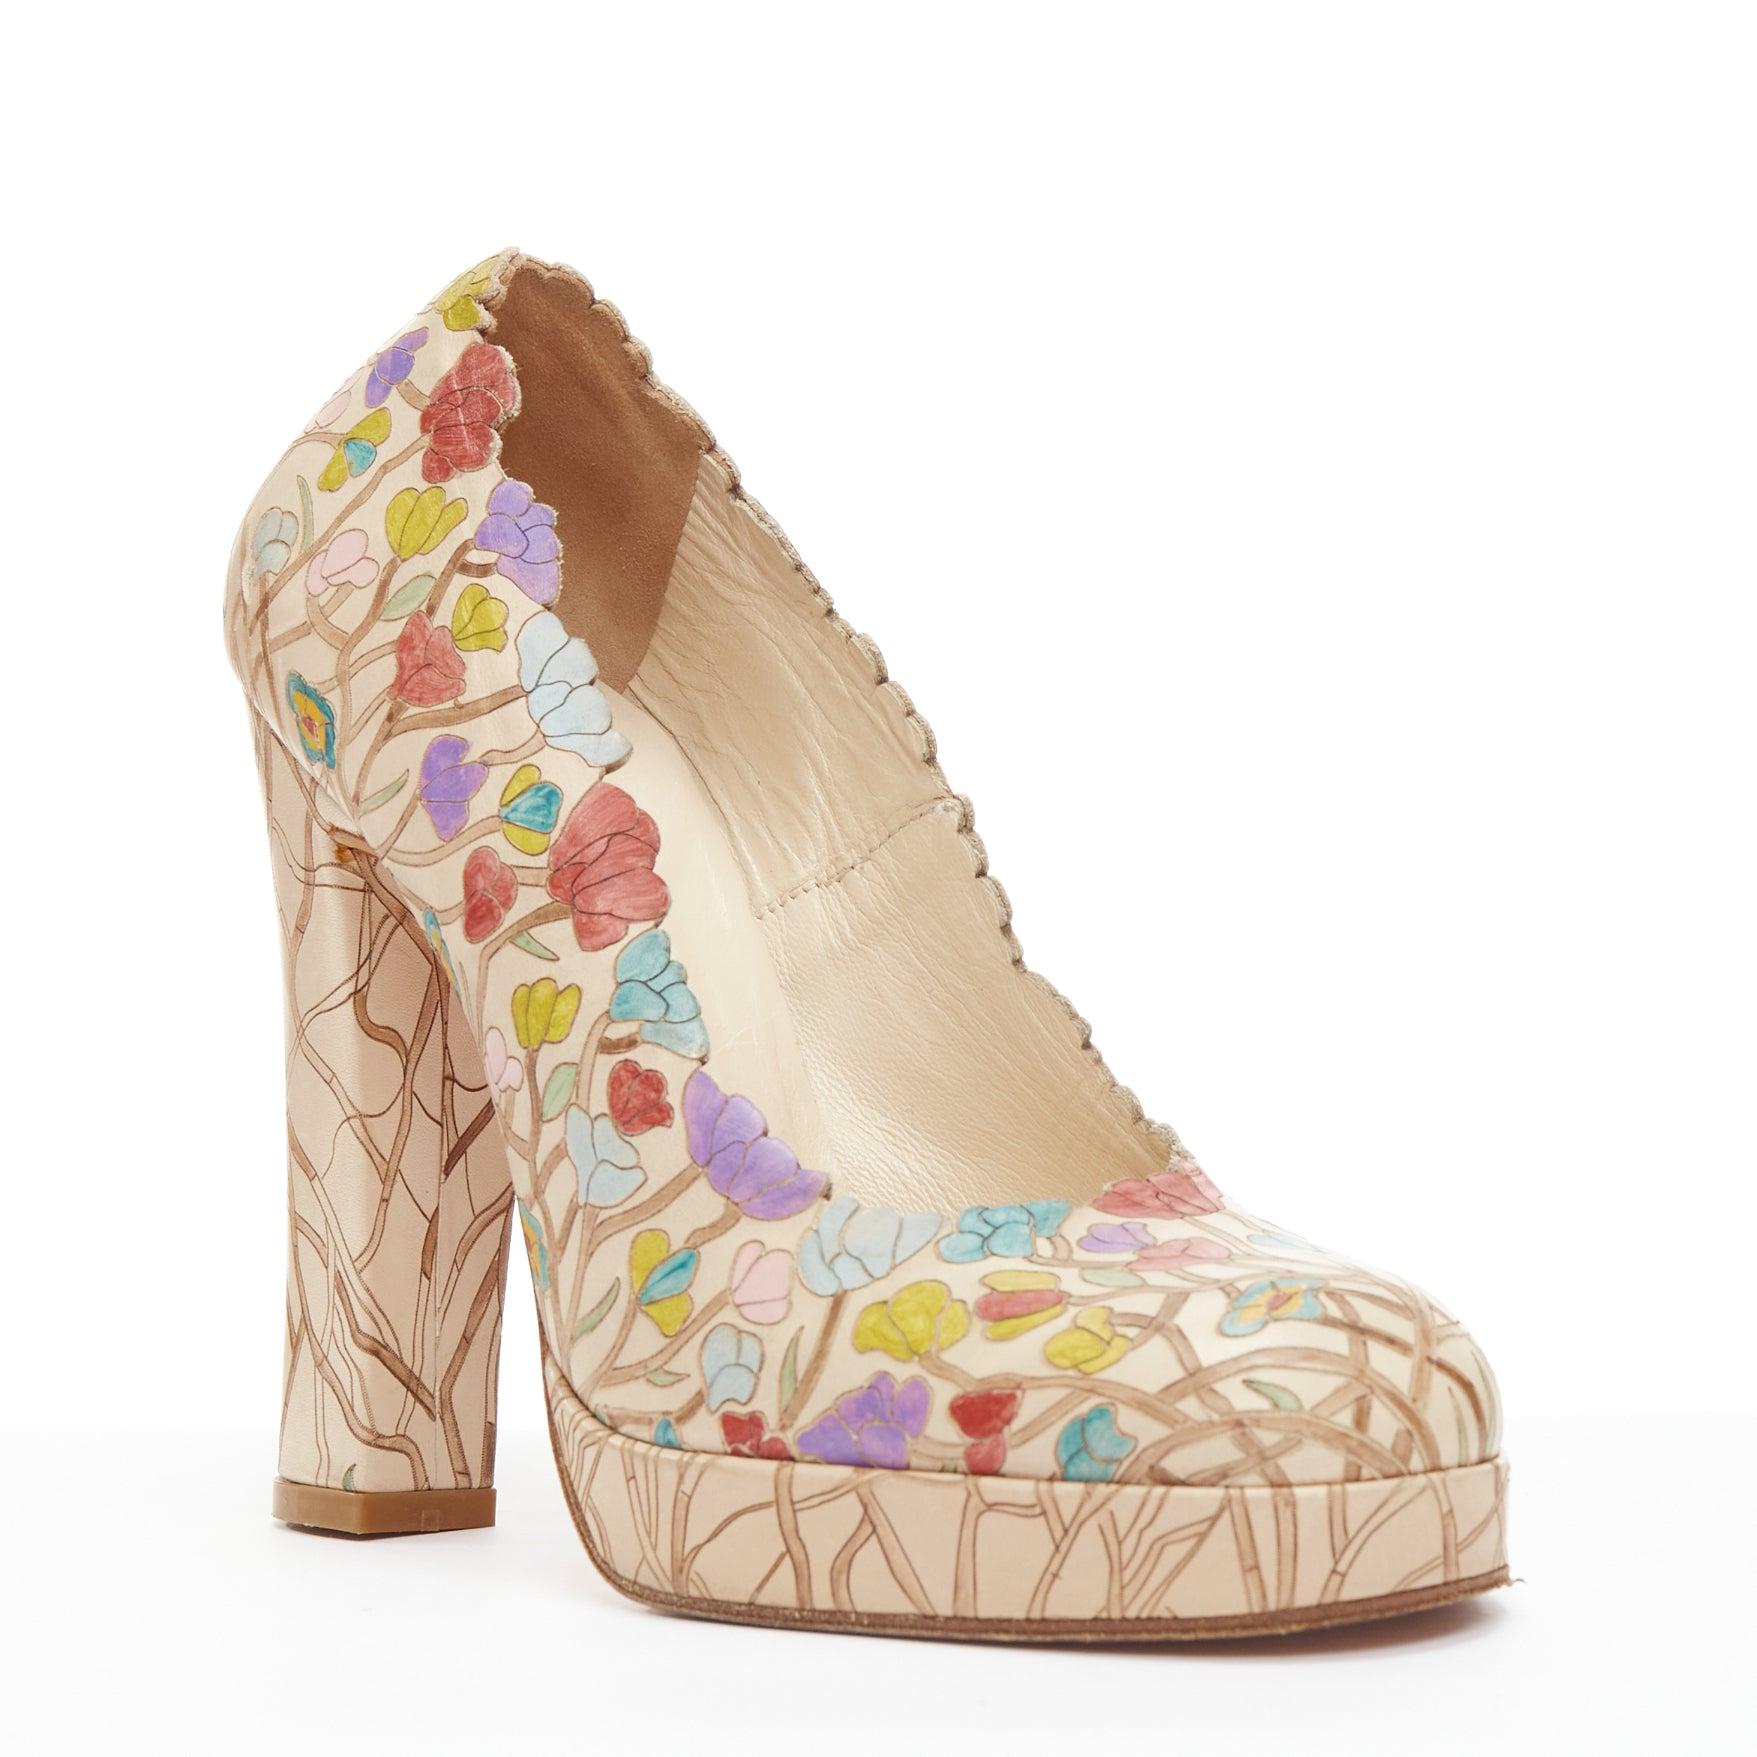 BIBA Vintage brown floral illustration scalloped round toe platform pump EU37
Reference: NKLL/A00127
Brand: Biba
Material: Leather
Color: Multicolour, Brown
Pattern: Floral
Lining: Brown Leather
Extra Details: Print and etched in leather. Scalloped